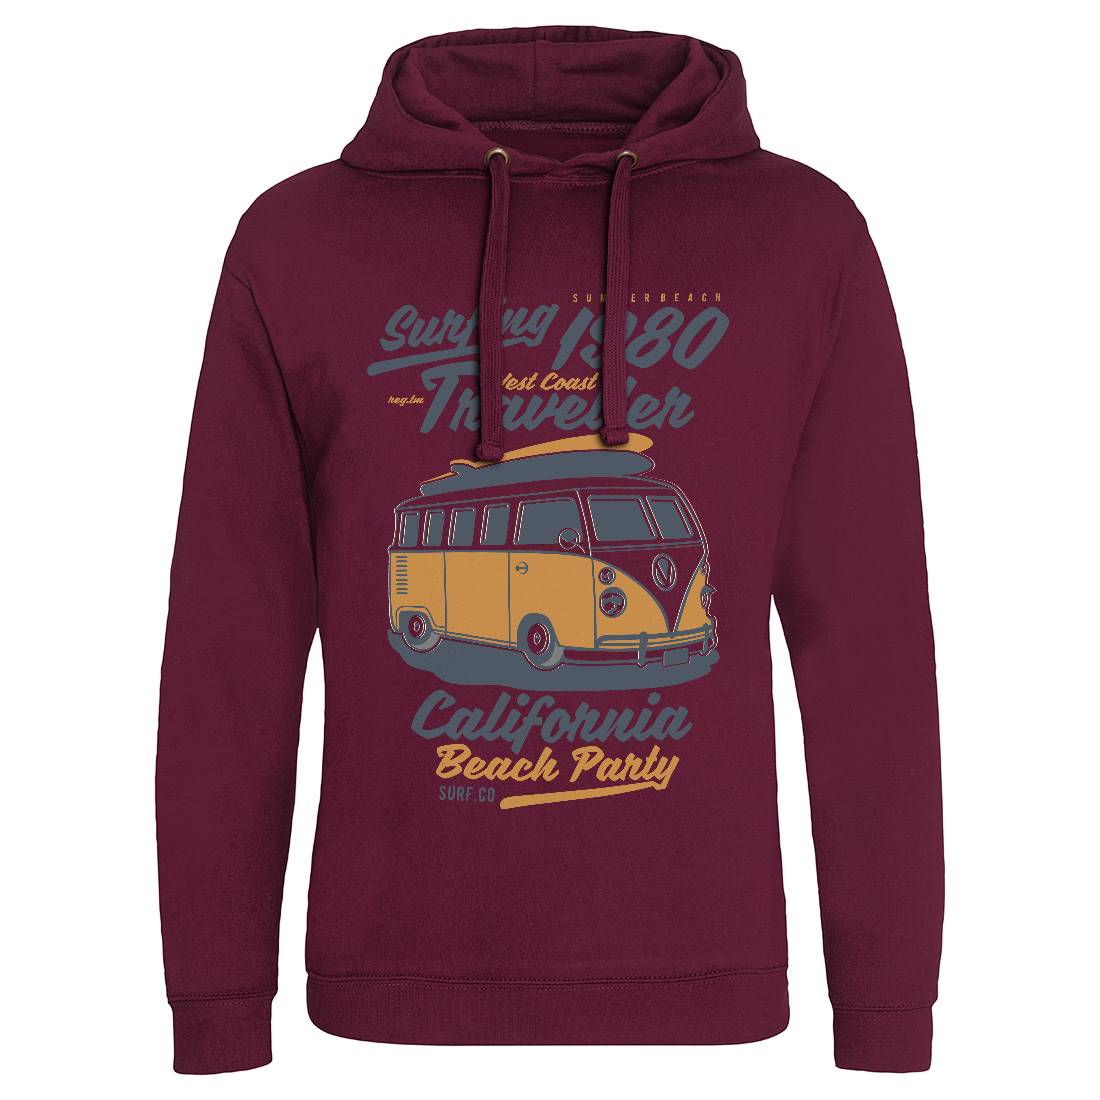 Surfing Mens Hoodie Without Pocket Surf B261